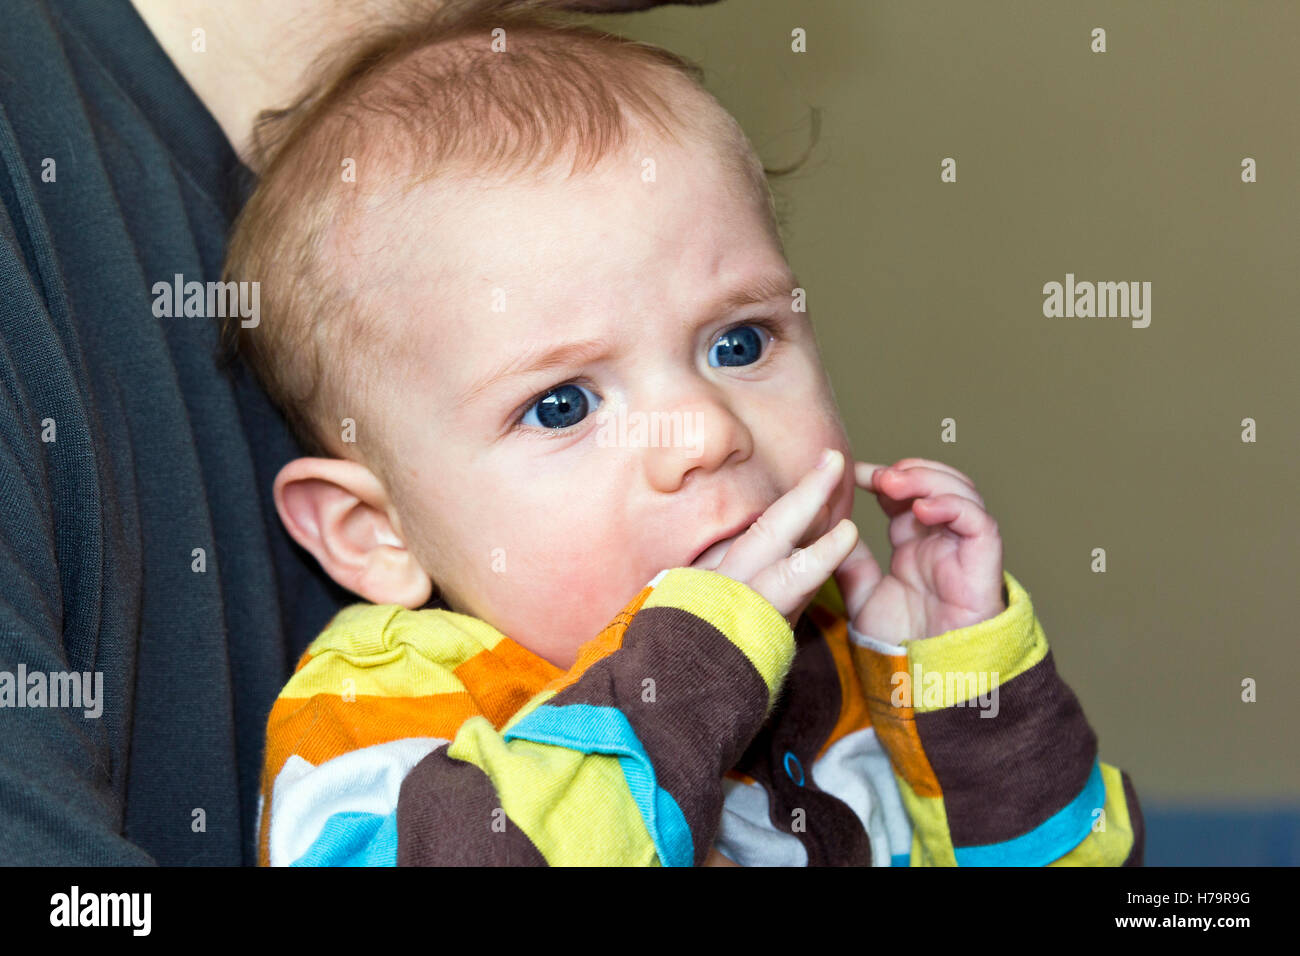 Baby boy chewing his own fingers when teething Stock Photo